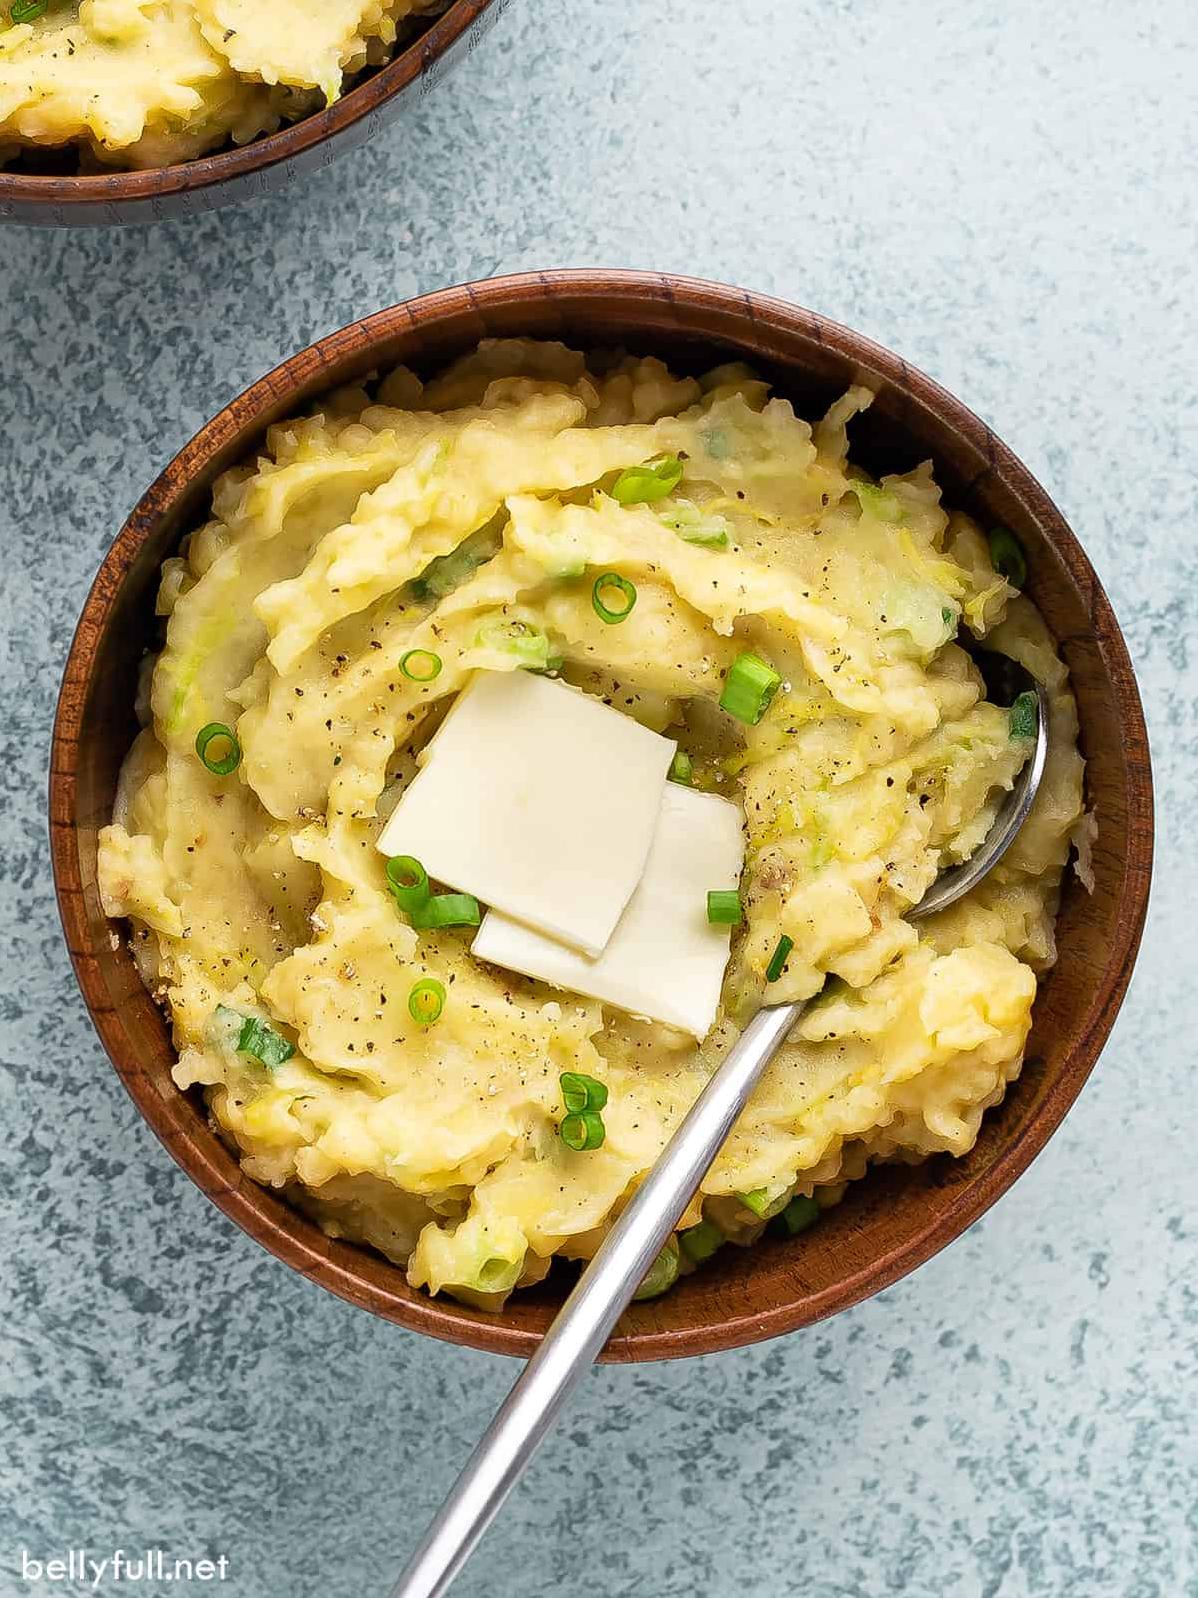  The comforting aroma of freshly mashed potatoes will fill your kitchen